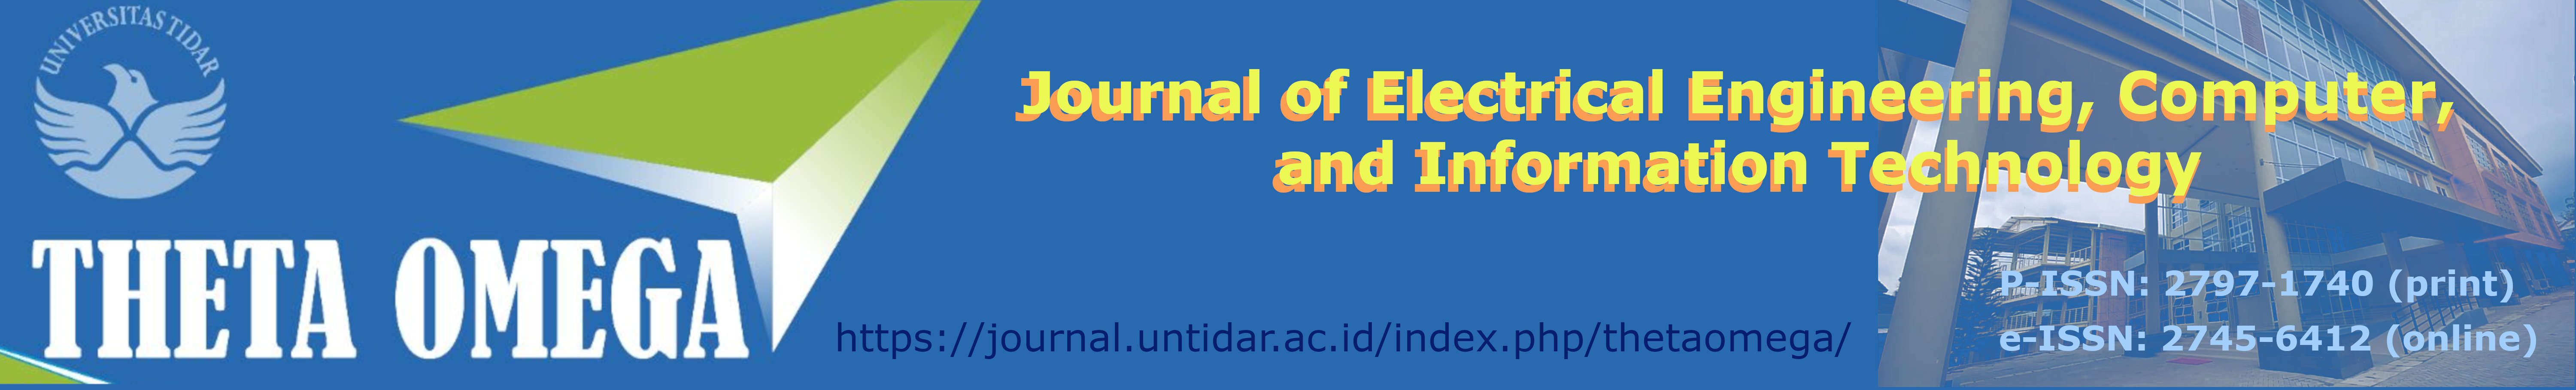 THETA OMEGA: Journal of Electrical Engineering, Computer, and Information Technology